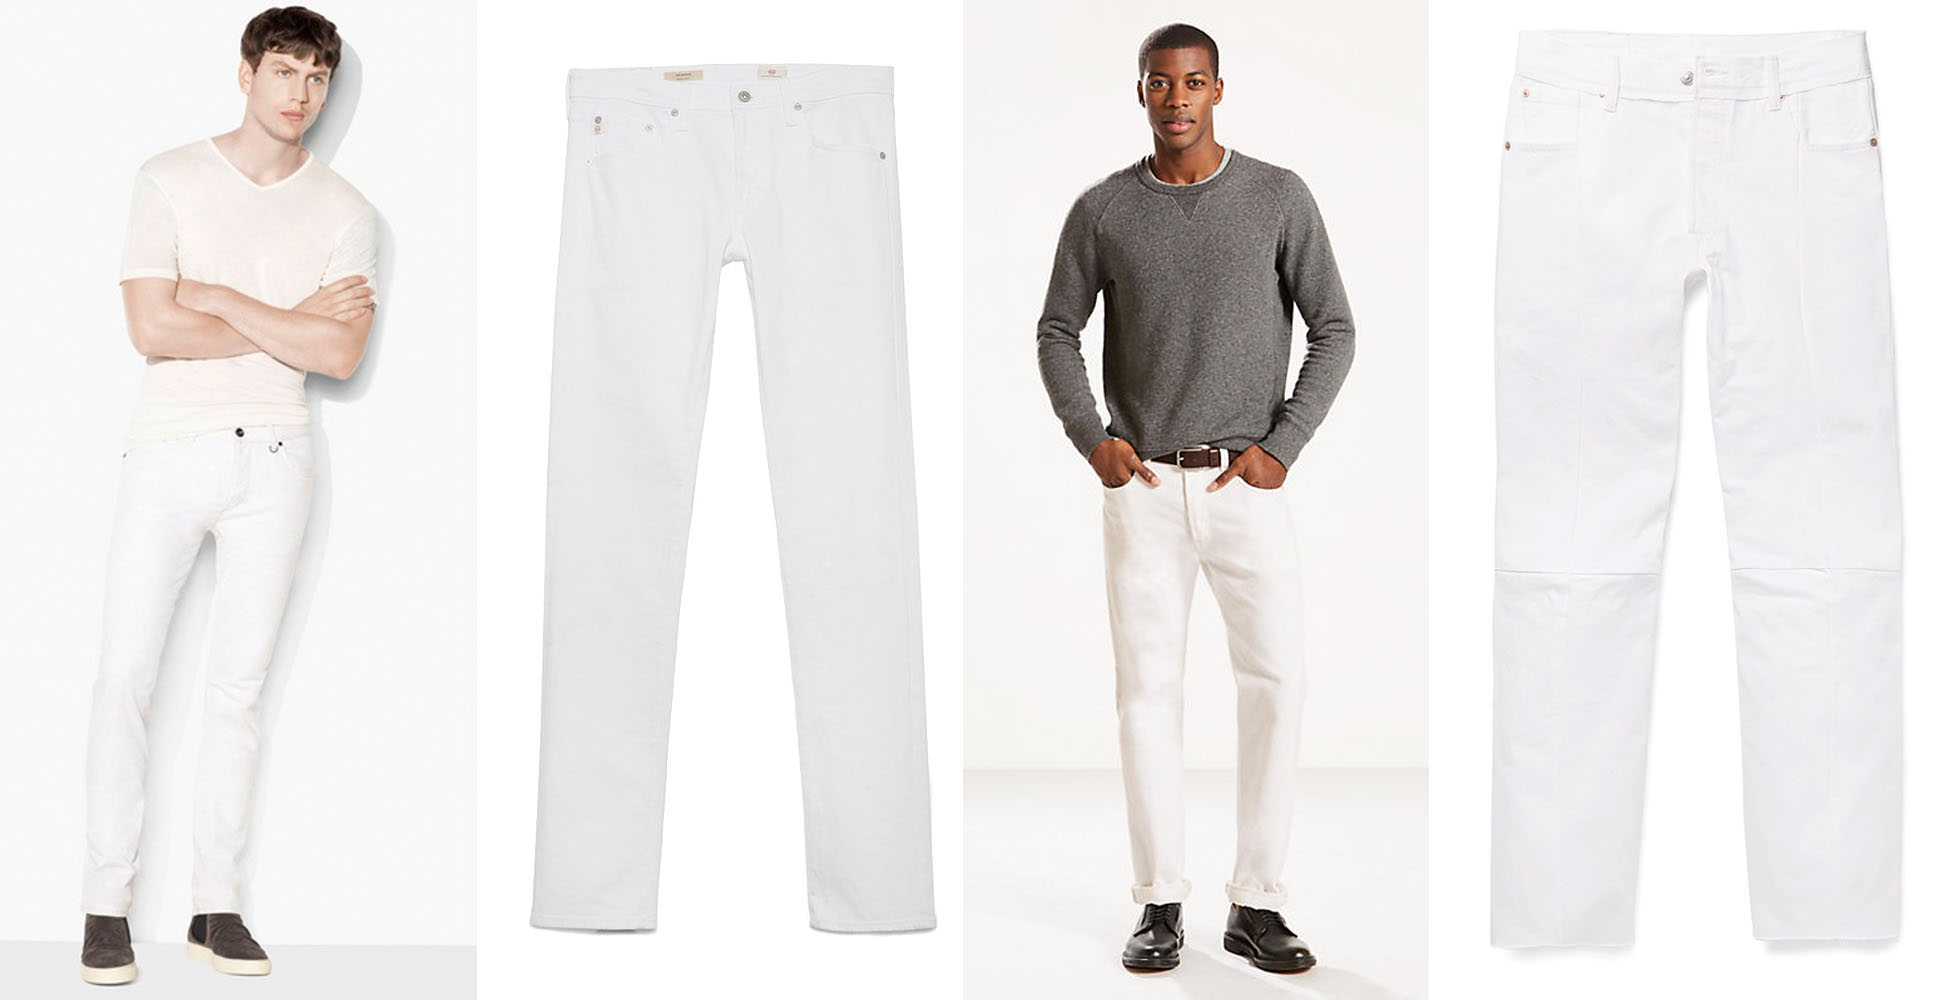 What do we think of the use of white pants with the City Connect